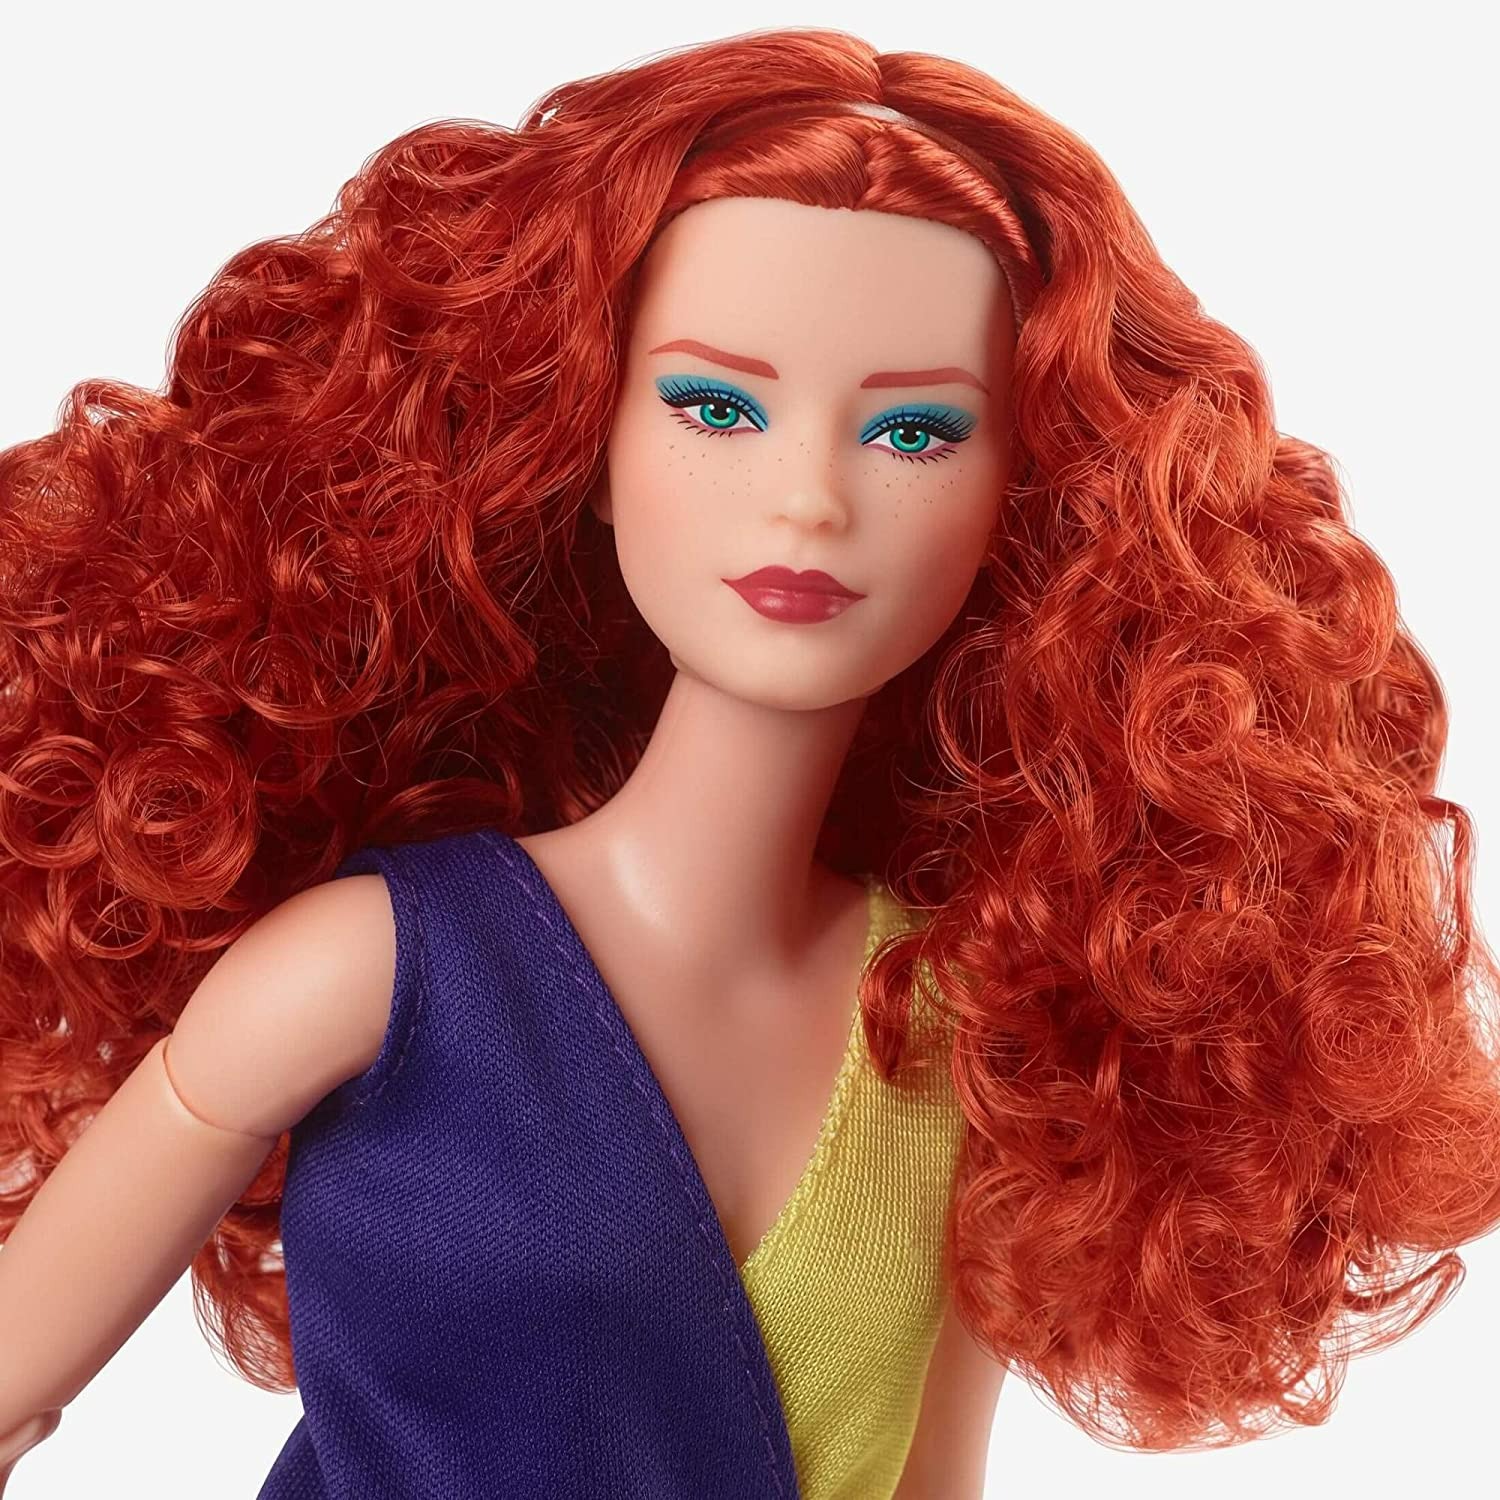 Barbie Looks Doll with Curly Red Hair-1